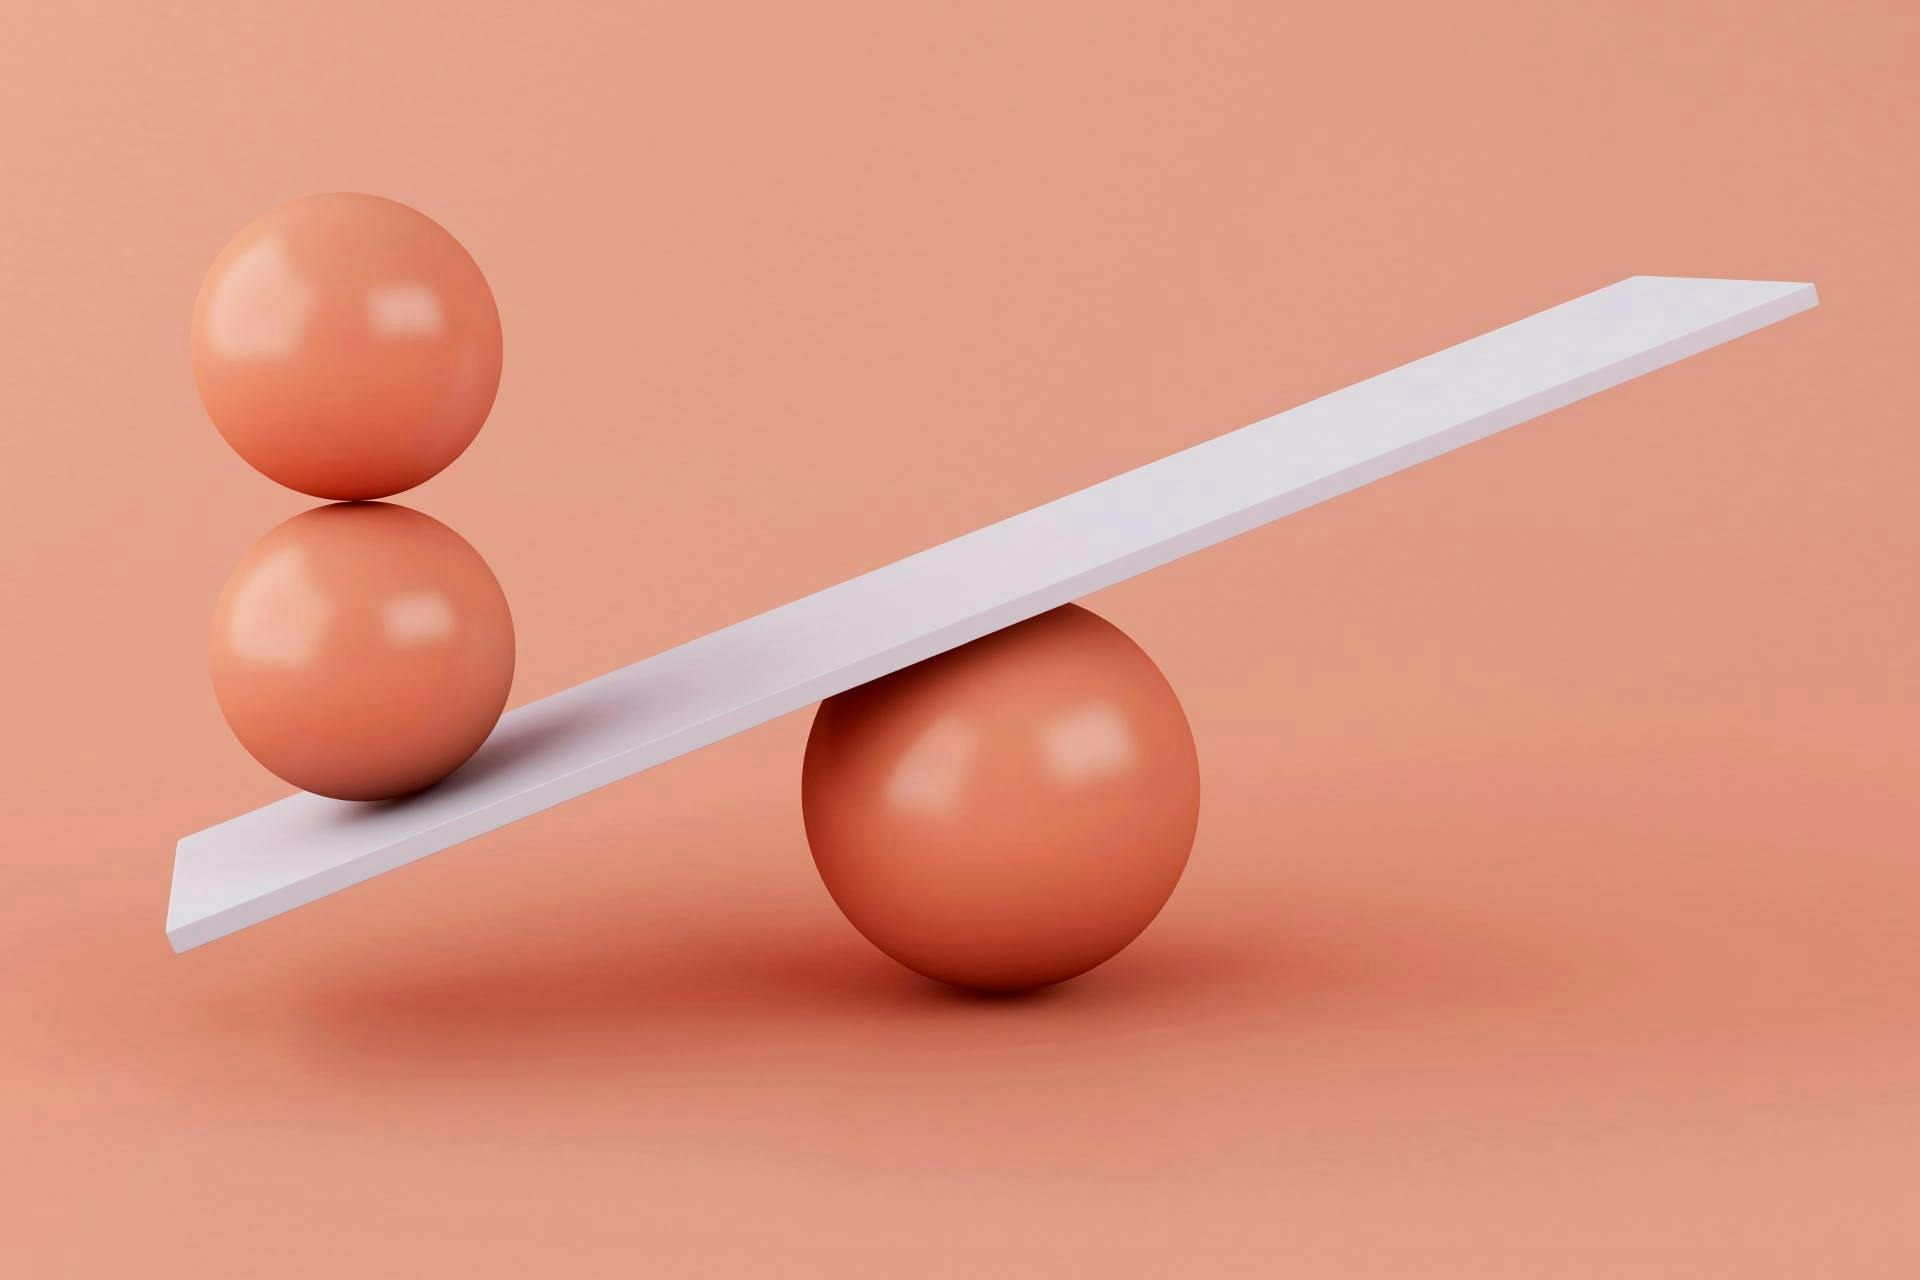 A seesaw with two orange balls balancing on one end of the seesaw. This image symbolizes the process that a marketing team may go through when weighing their different options when it comes to social media monitoring platforms.